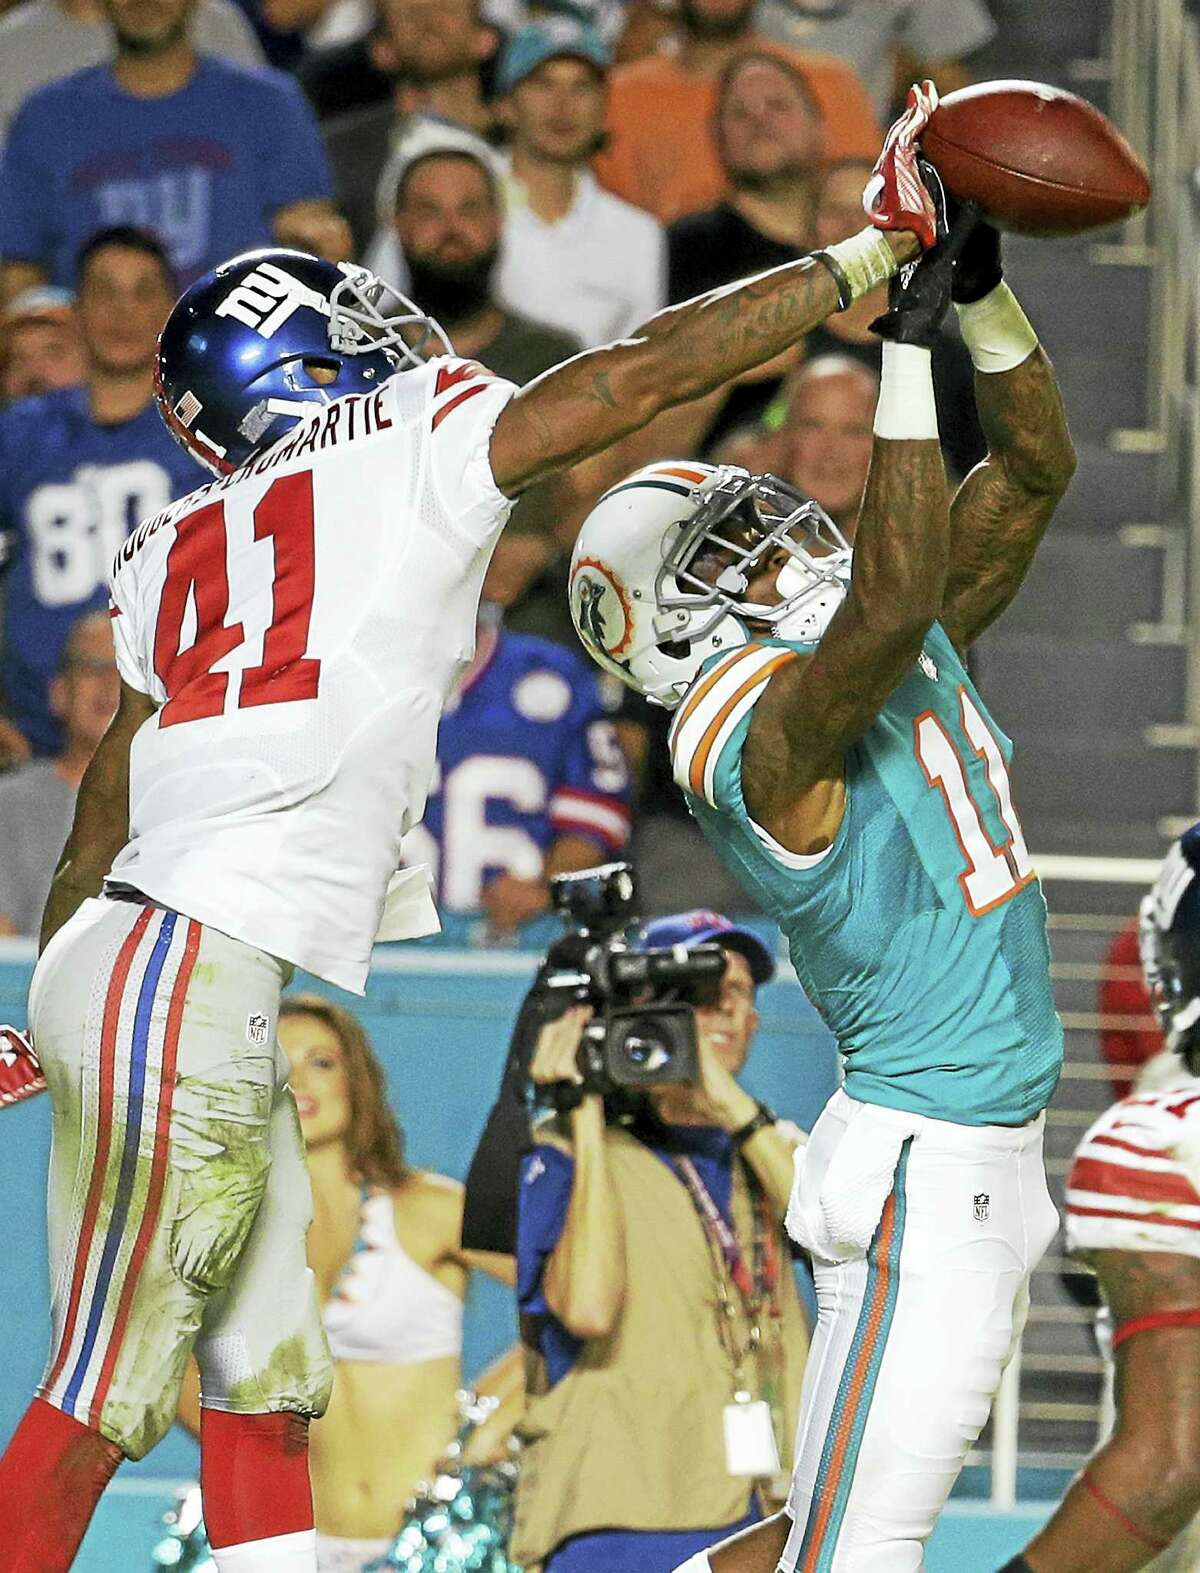 Giants cornerback Dominique Rodgers-Cromartie (41) will be playing the Pro Bowl on Sunday.